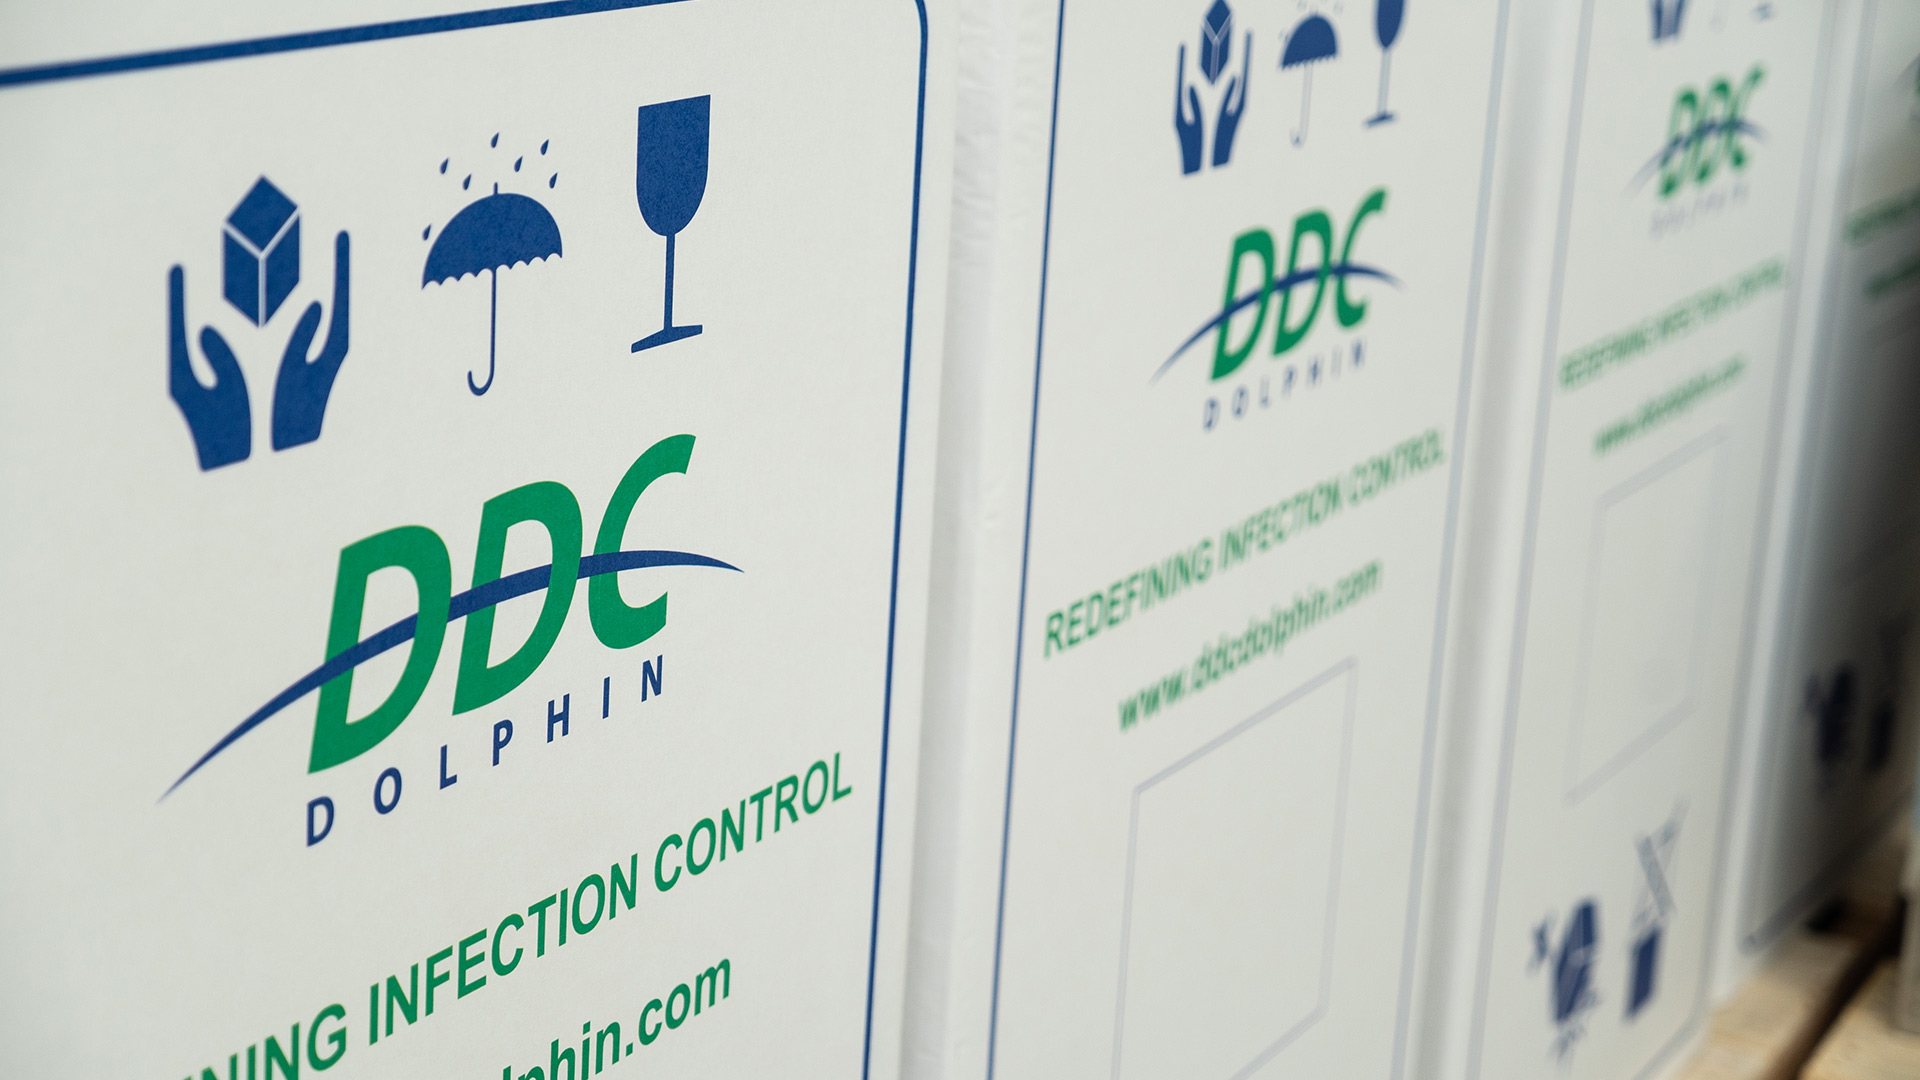 Infection Control Packaging - DDC Dolphin